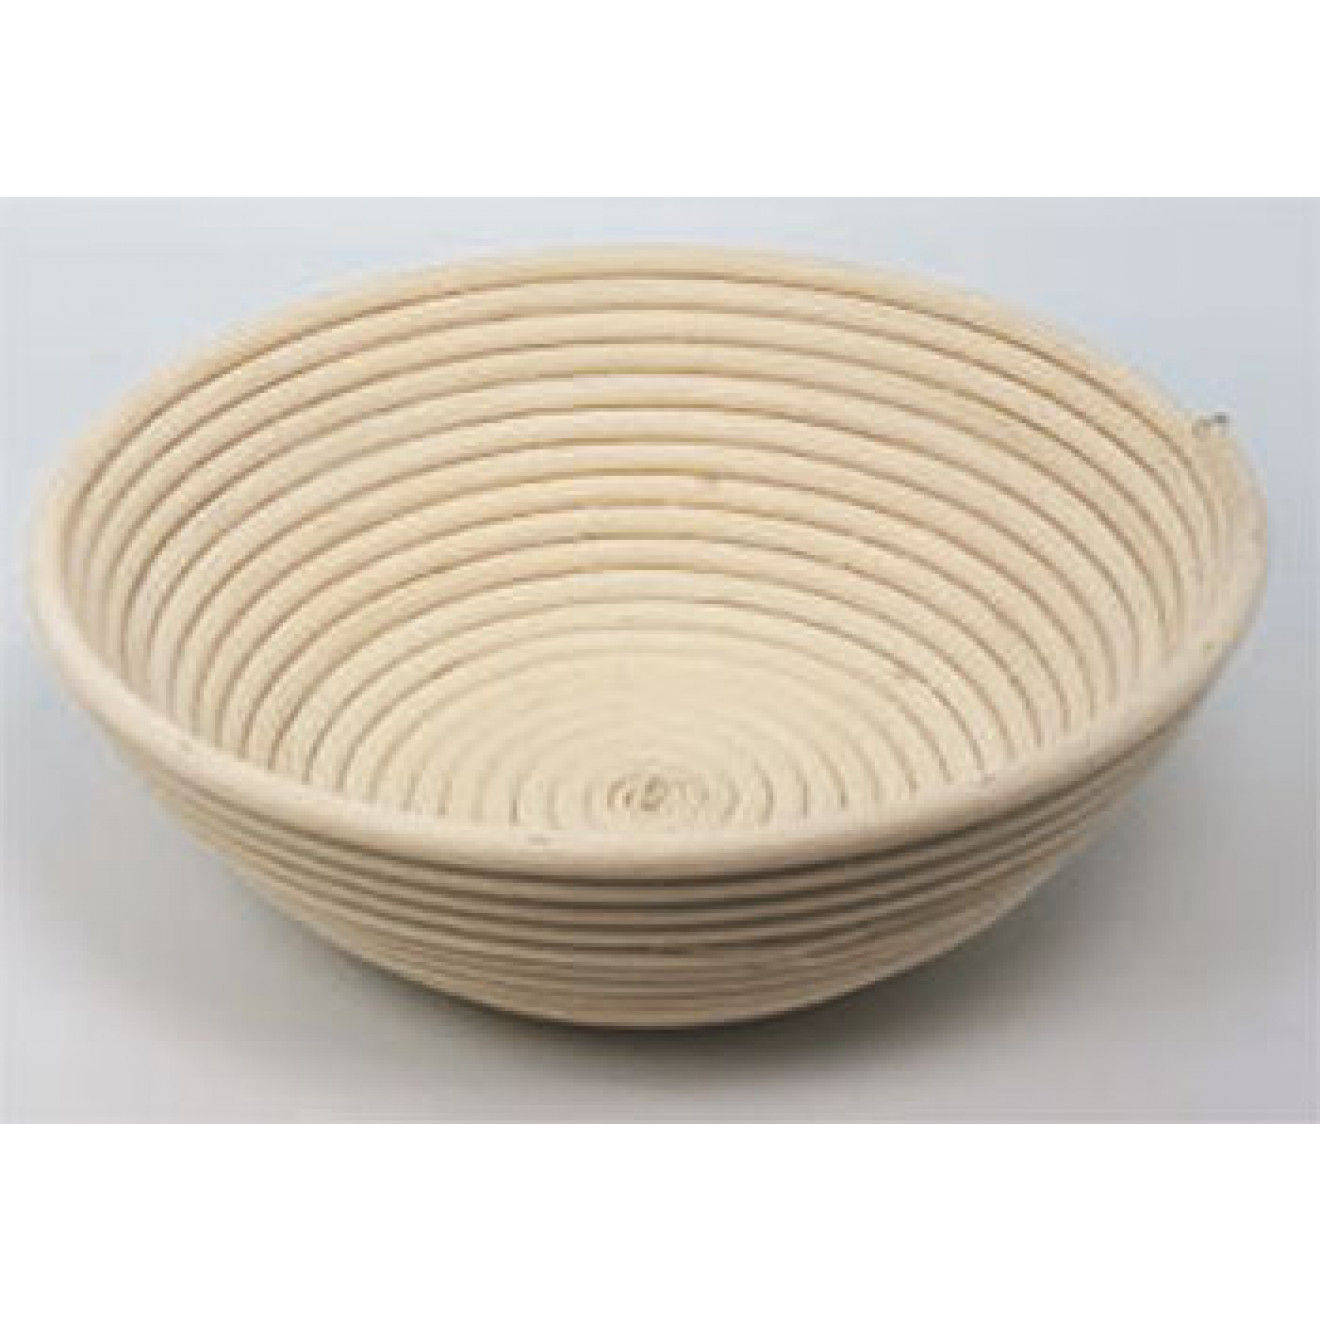 Banneton Proofing Basket Round Sourdough Proofing Basket Set with Cloth Liner Dough Scraper Silicone Brush Natural Rattan Brotform Bread Basket for Professional & Home Bakers,1 pack 5 inch 